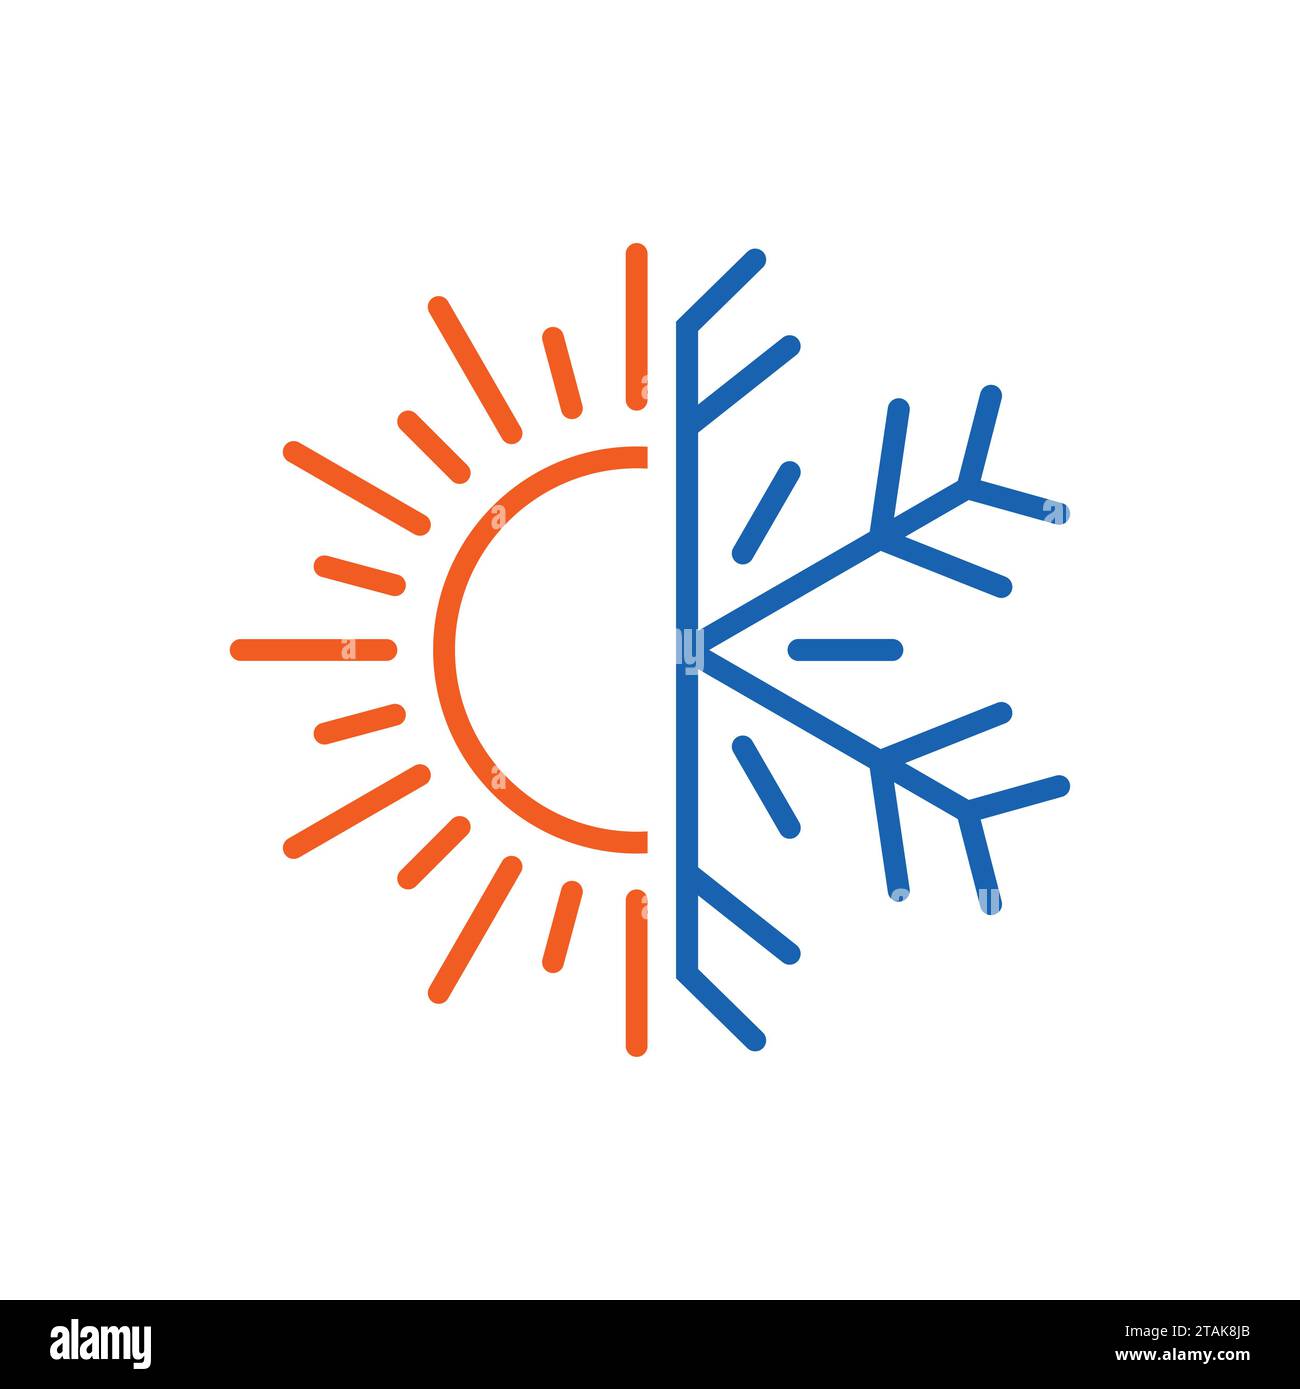 Hot and cold icon isolated on white background. Sun and snowflake symbol vector illustration Stock Vector